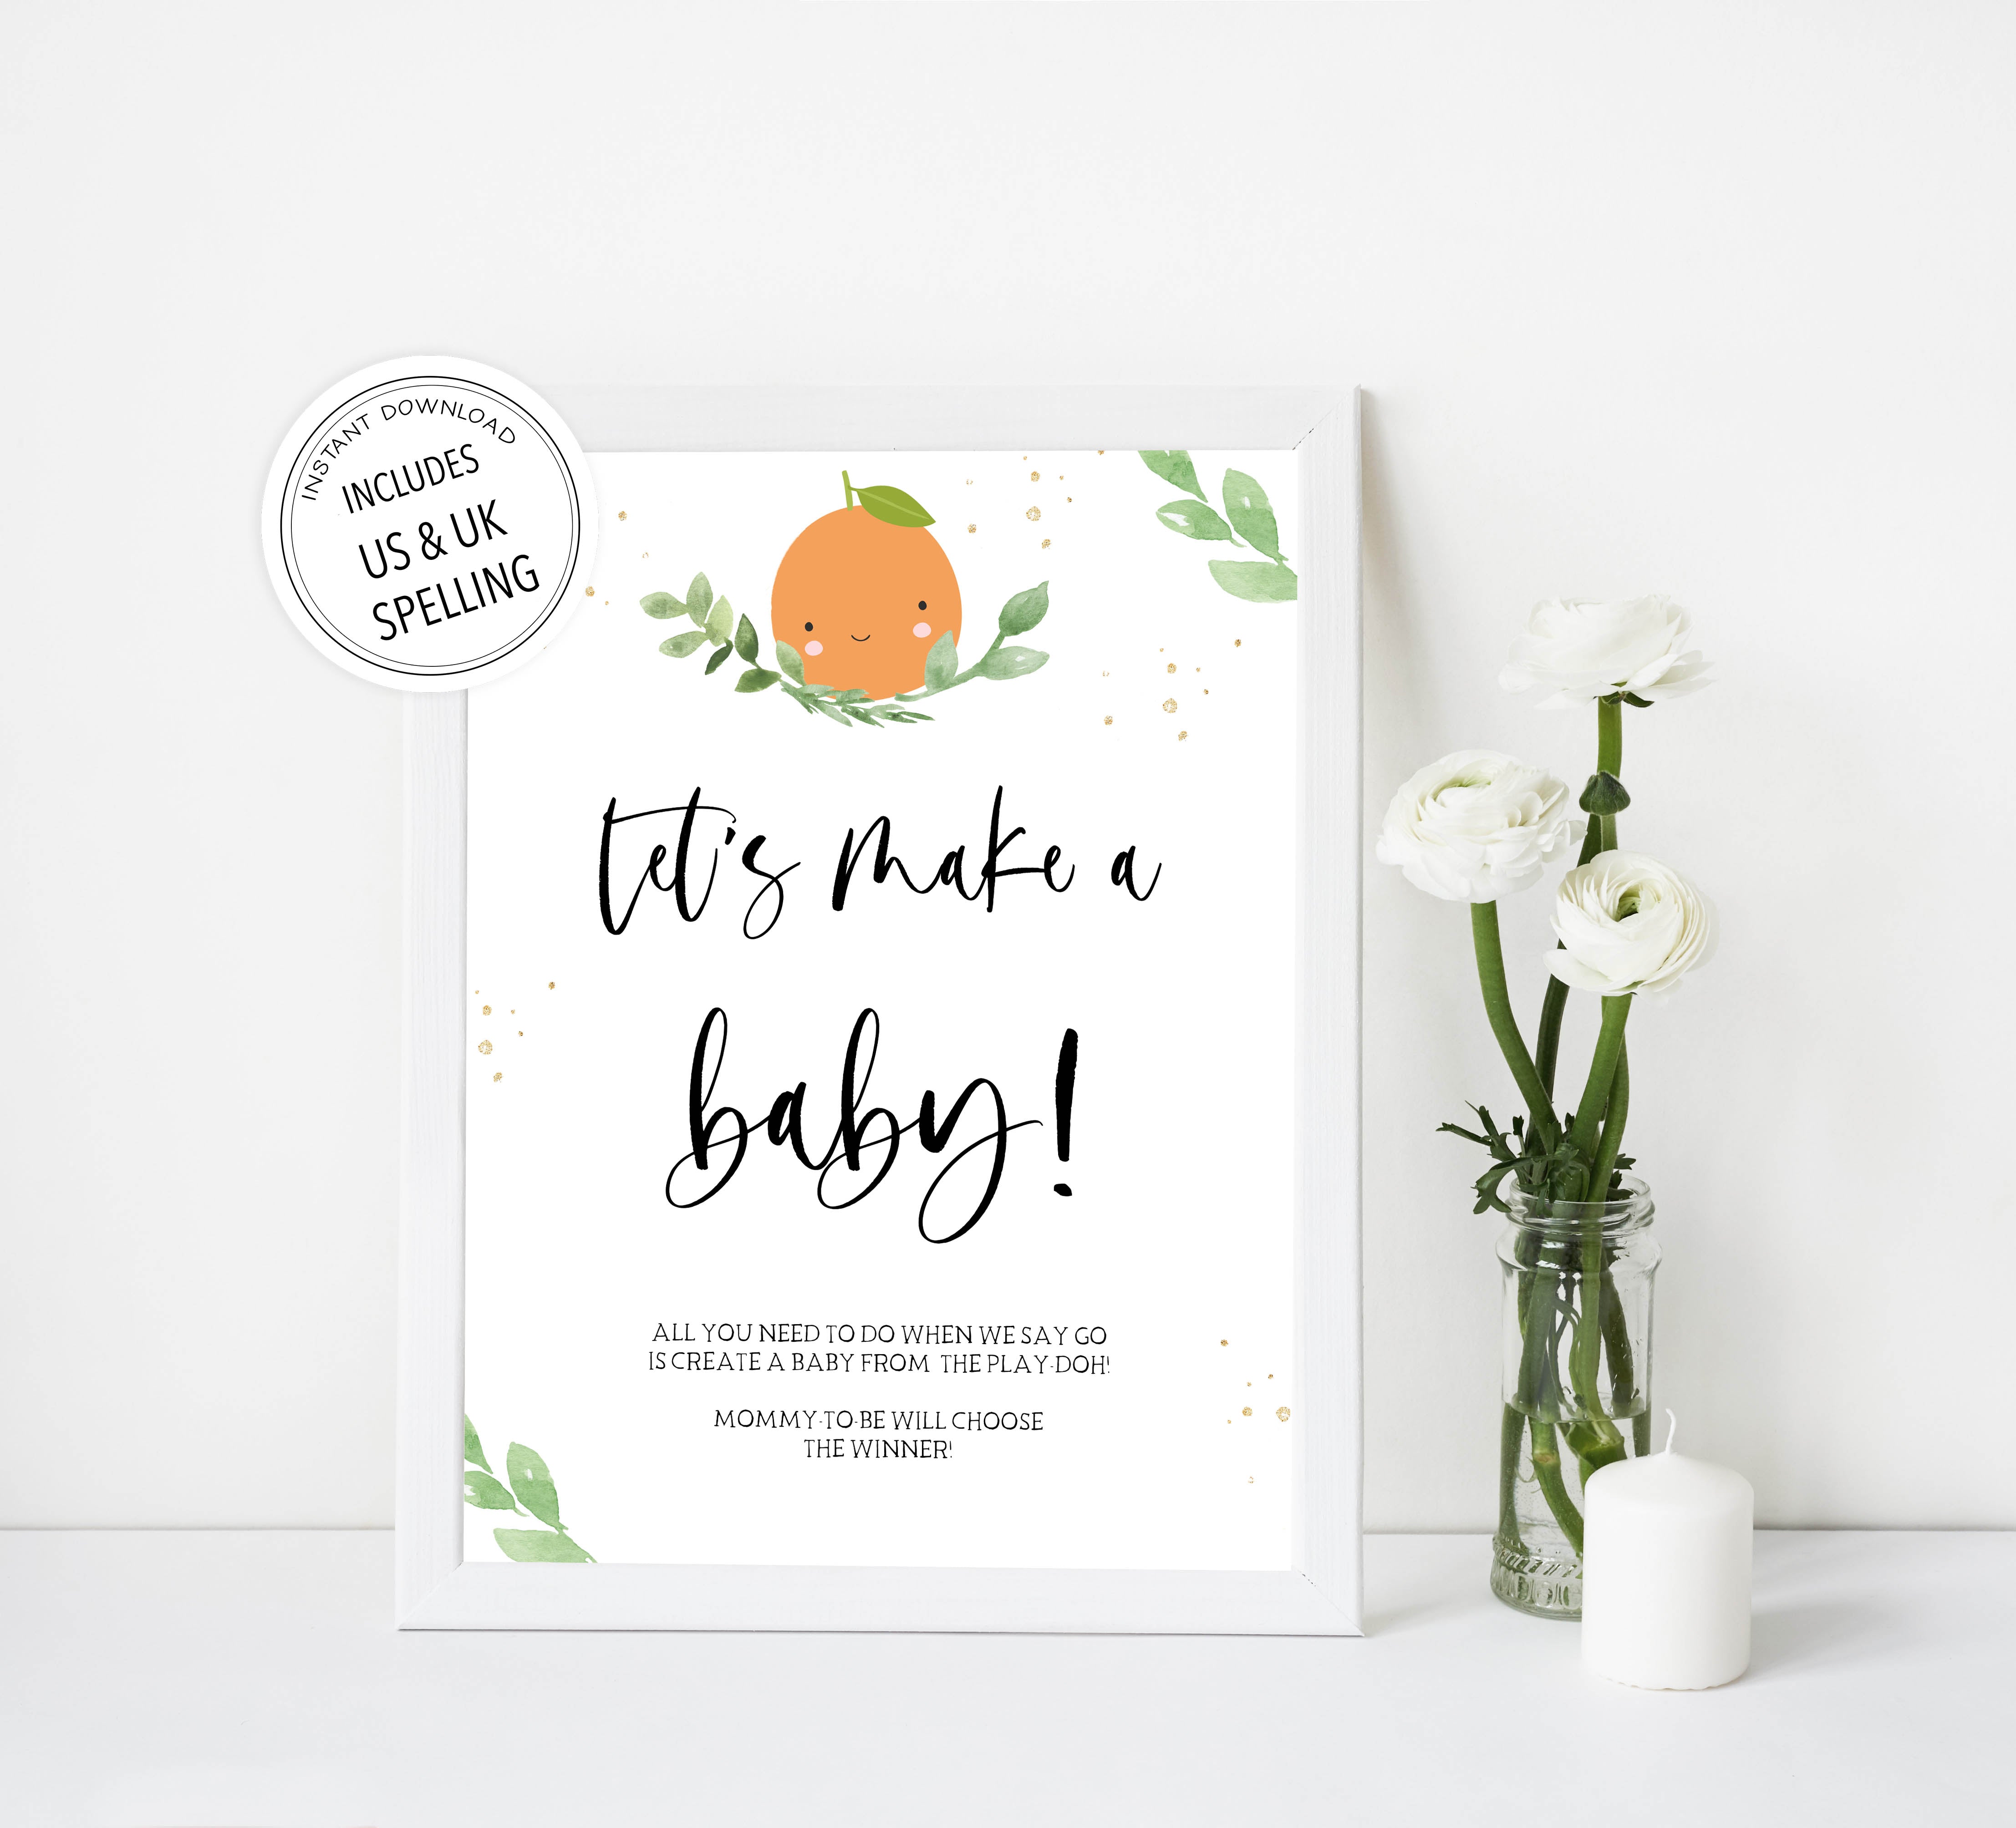 lets make a baby game, Printable baby shower games, little cutie baby games, baby shower games, fun baby shower ideas, top baby shower ideas, little cutie baby shower, baby shower games, fun little cutie baby shower ideas